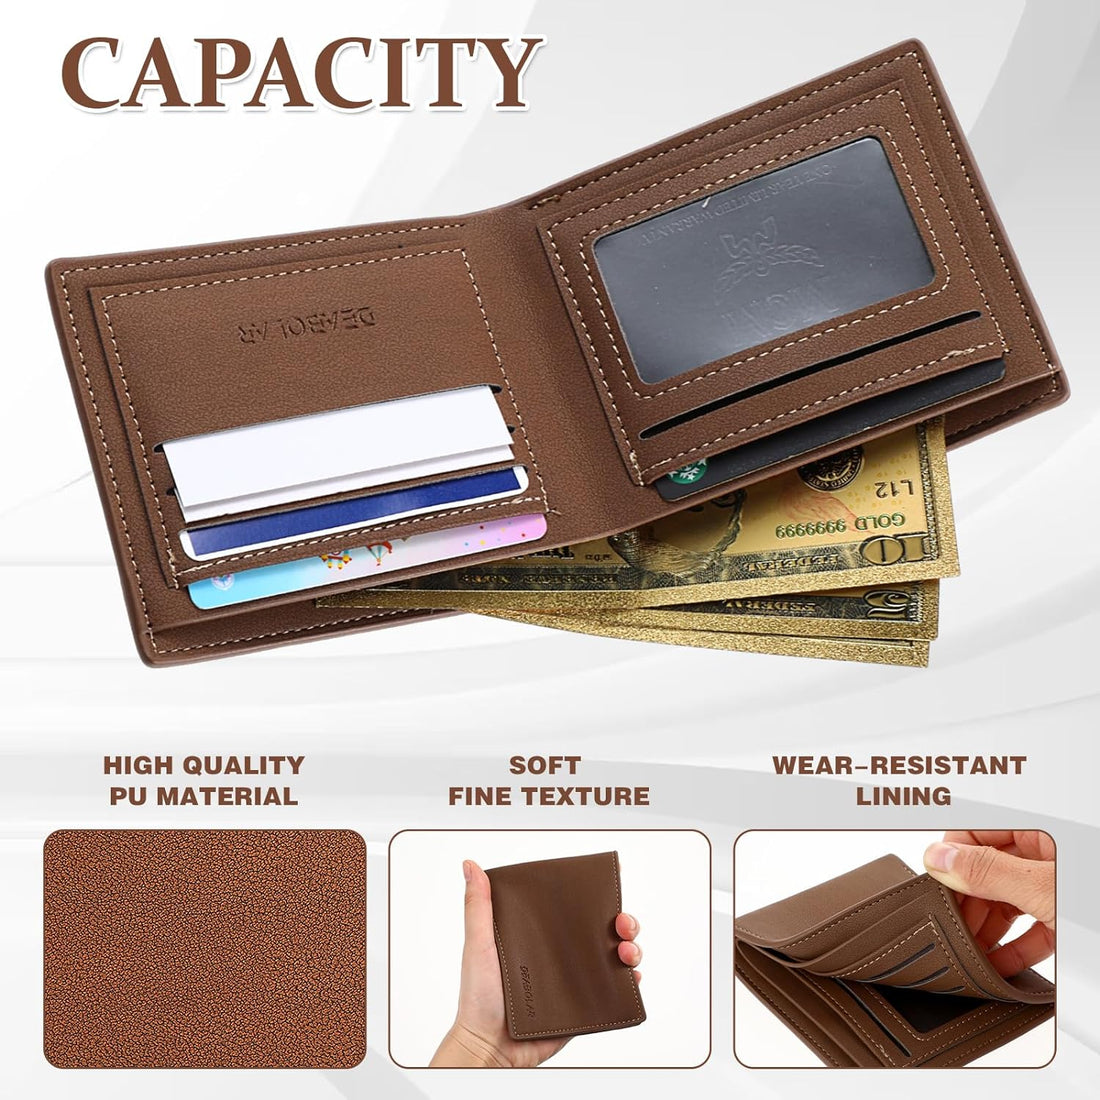 Amaxiu PU Leather Bifold Wallet for Men, Men’s Coin Pocket Slim Wallet With 5 Credit Cards Slots 2 Cash Pockets 1 ID Window, Light brown